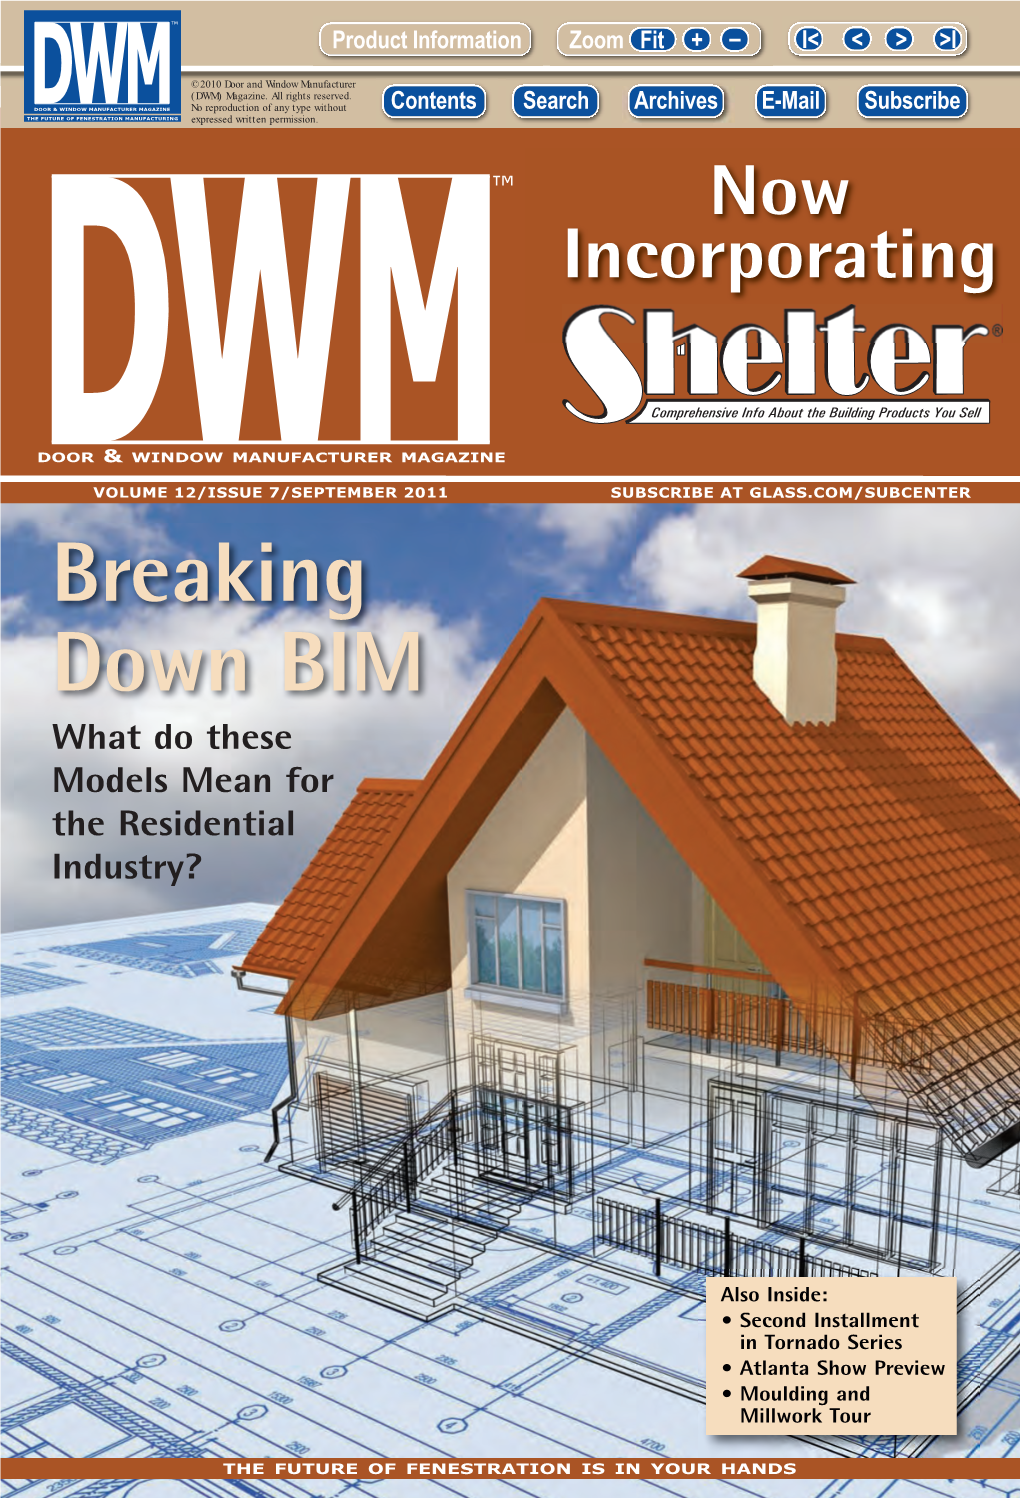 Breaking Down BIM What Do These Models Mean for the Residential Industry?